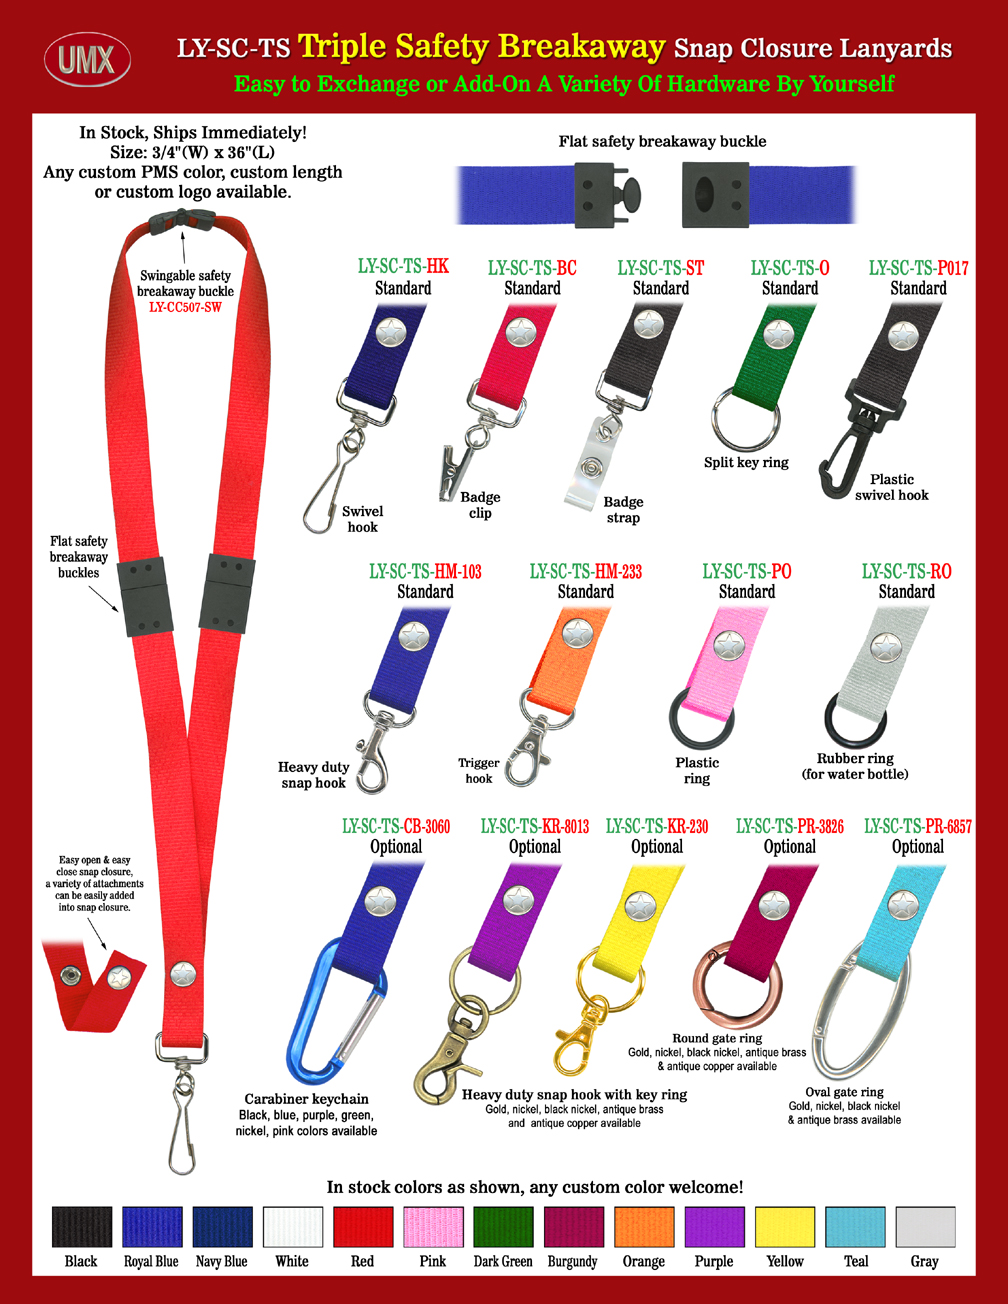 3/4" Three Safety Breakaway Snap Closure Lanyards With Triple Protection.